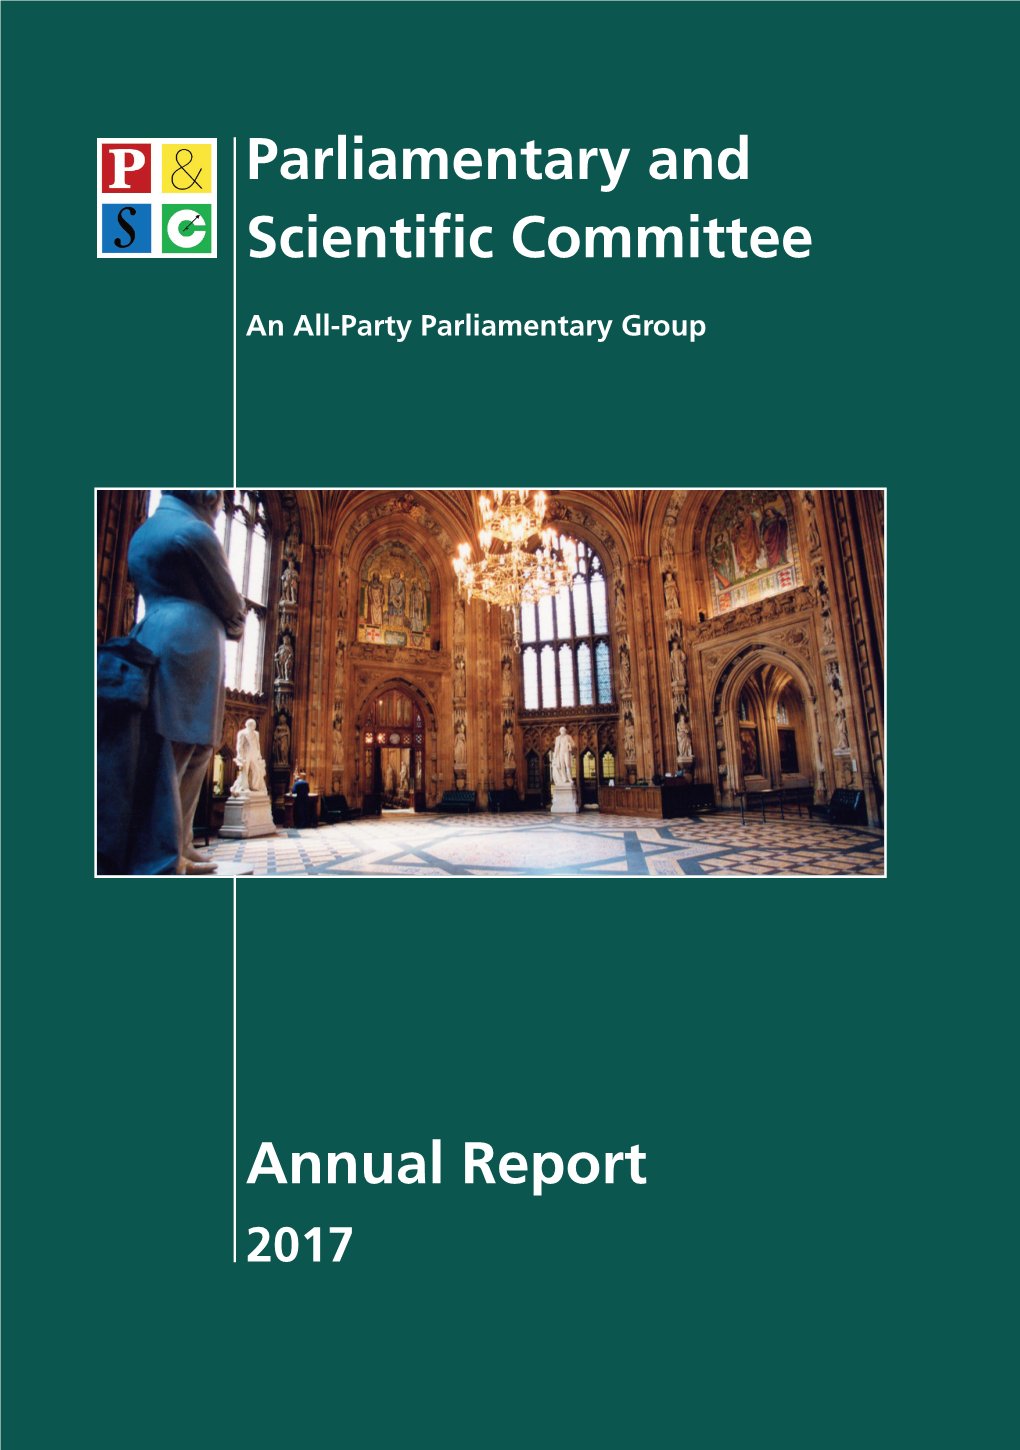 Parliamentary and Scientific Committee Annual Report